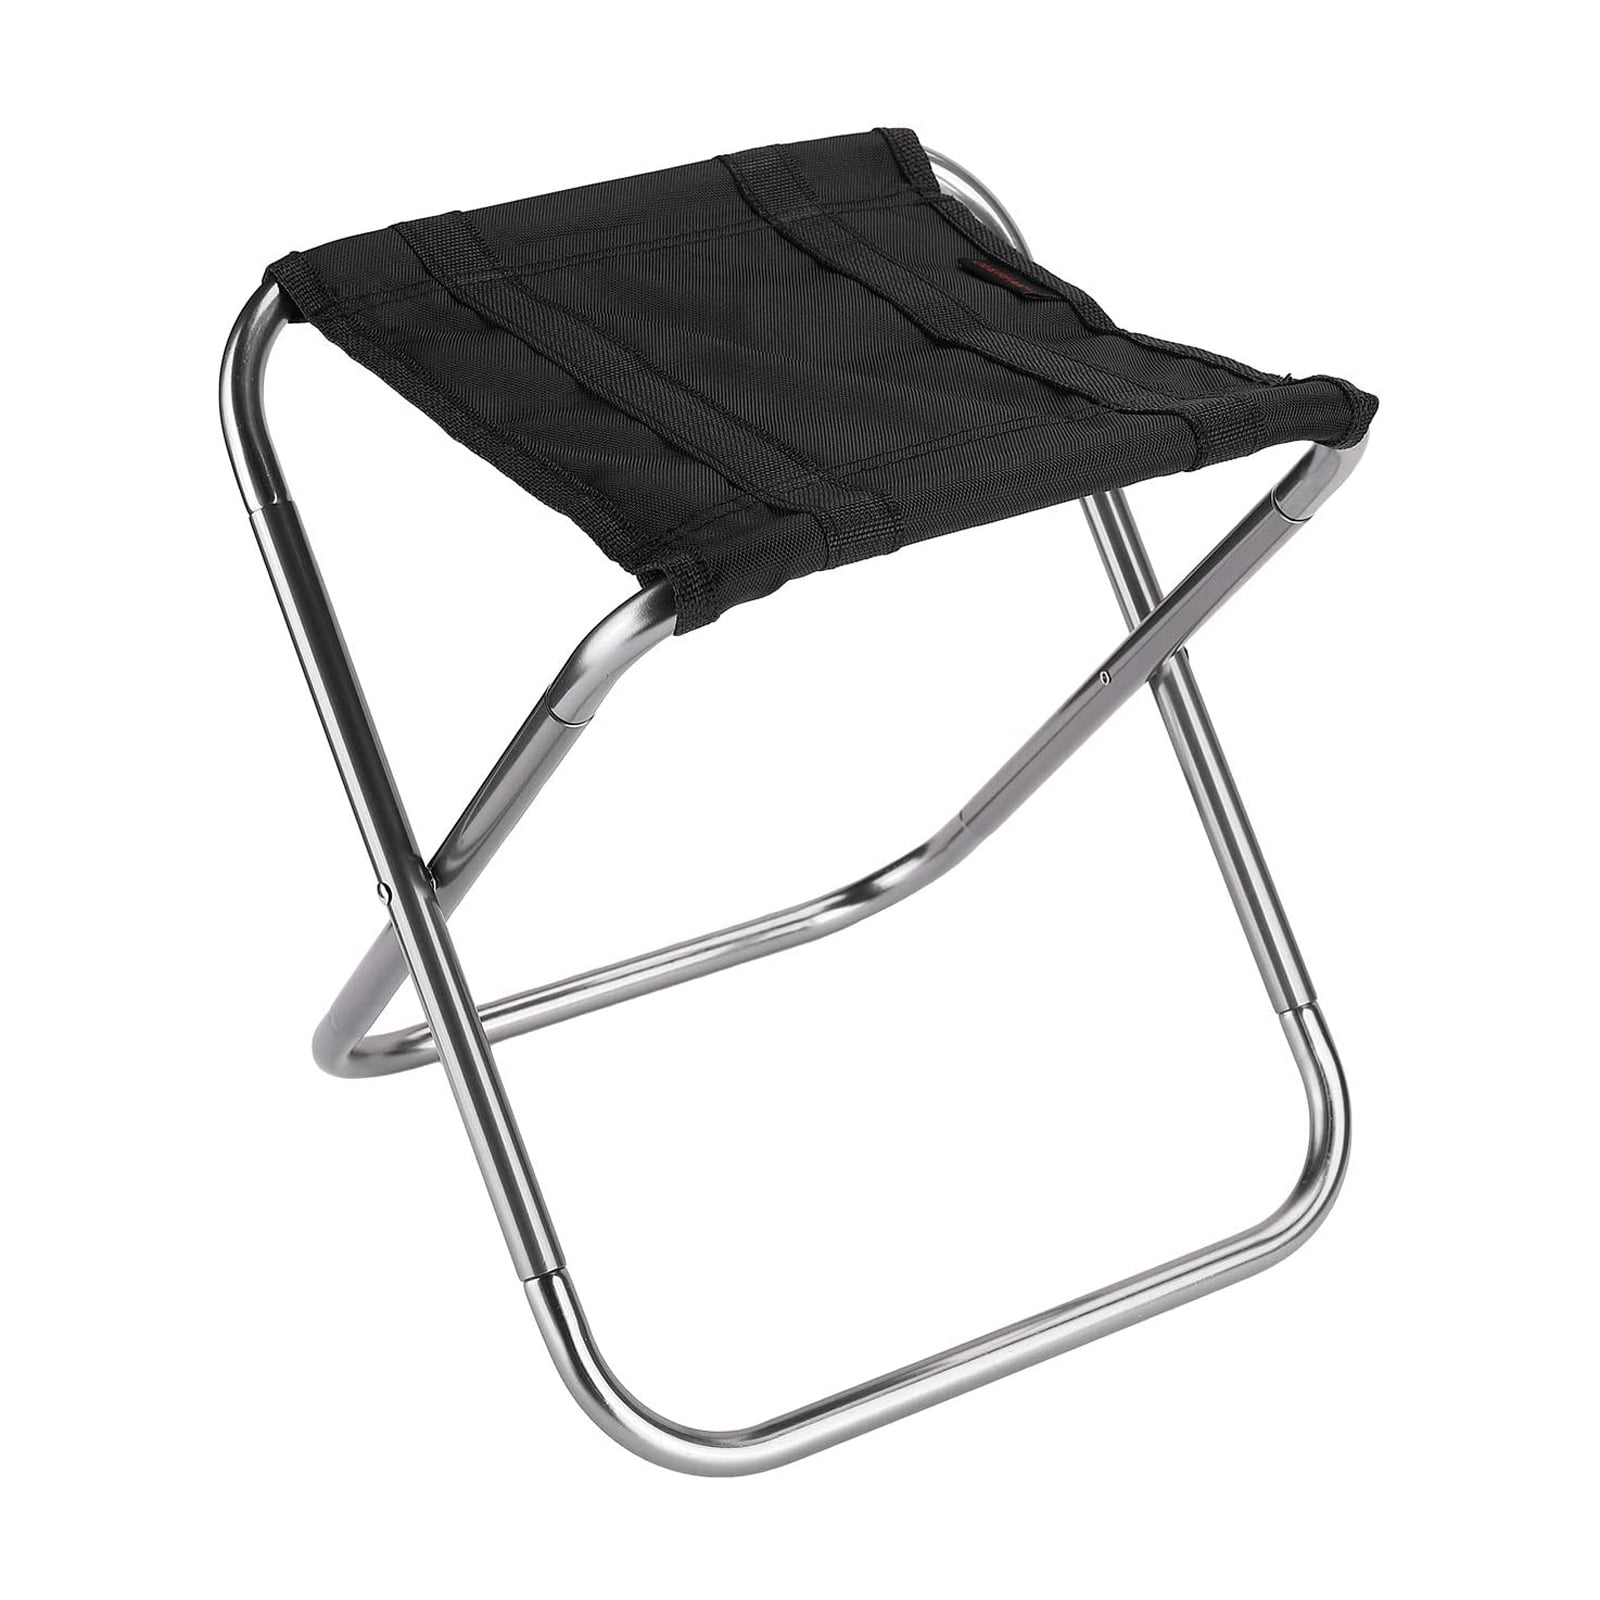 Aluminum Portable Folding Chair Outdoor Camping Fishing Picnic BBQ Stool Seat